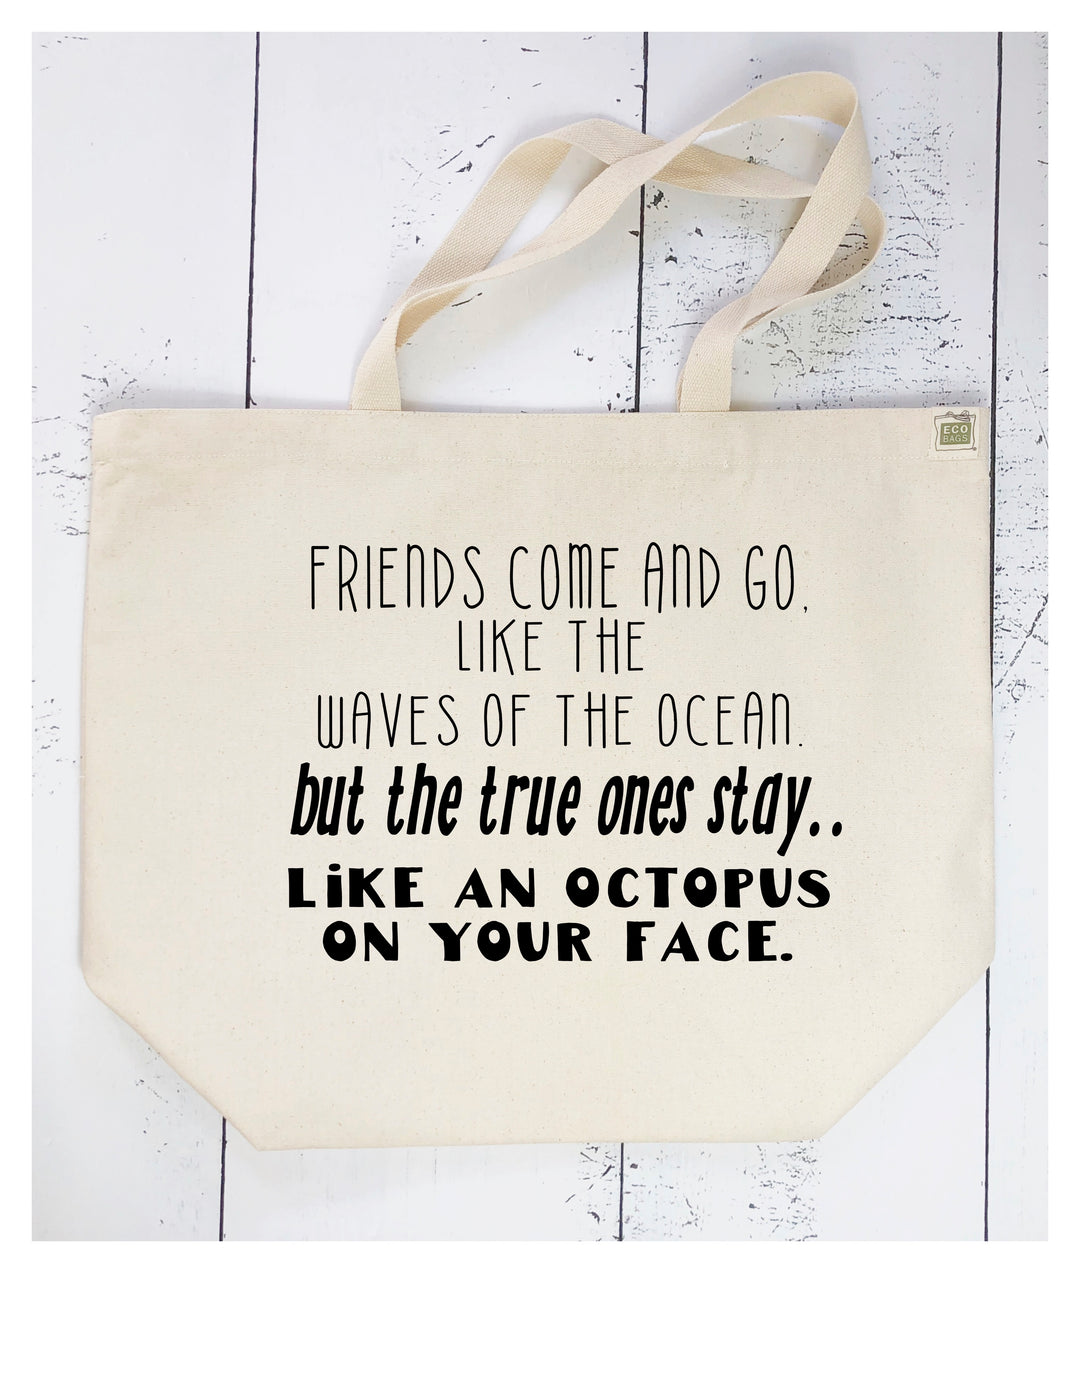 friends come and go - tote bag